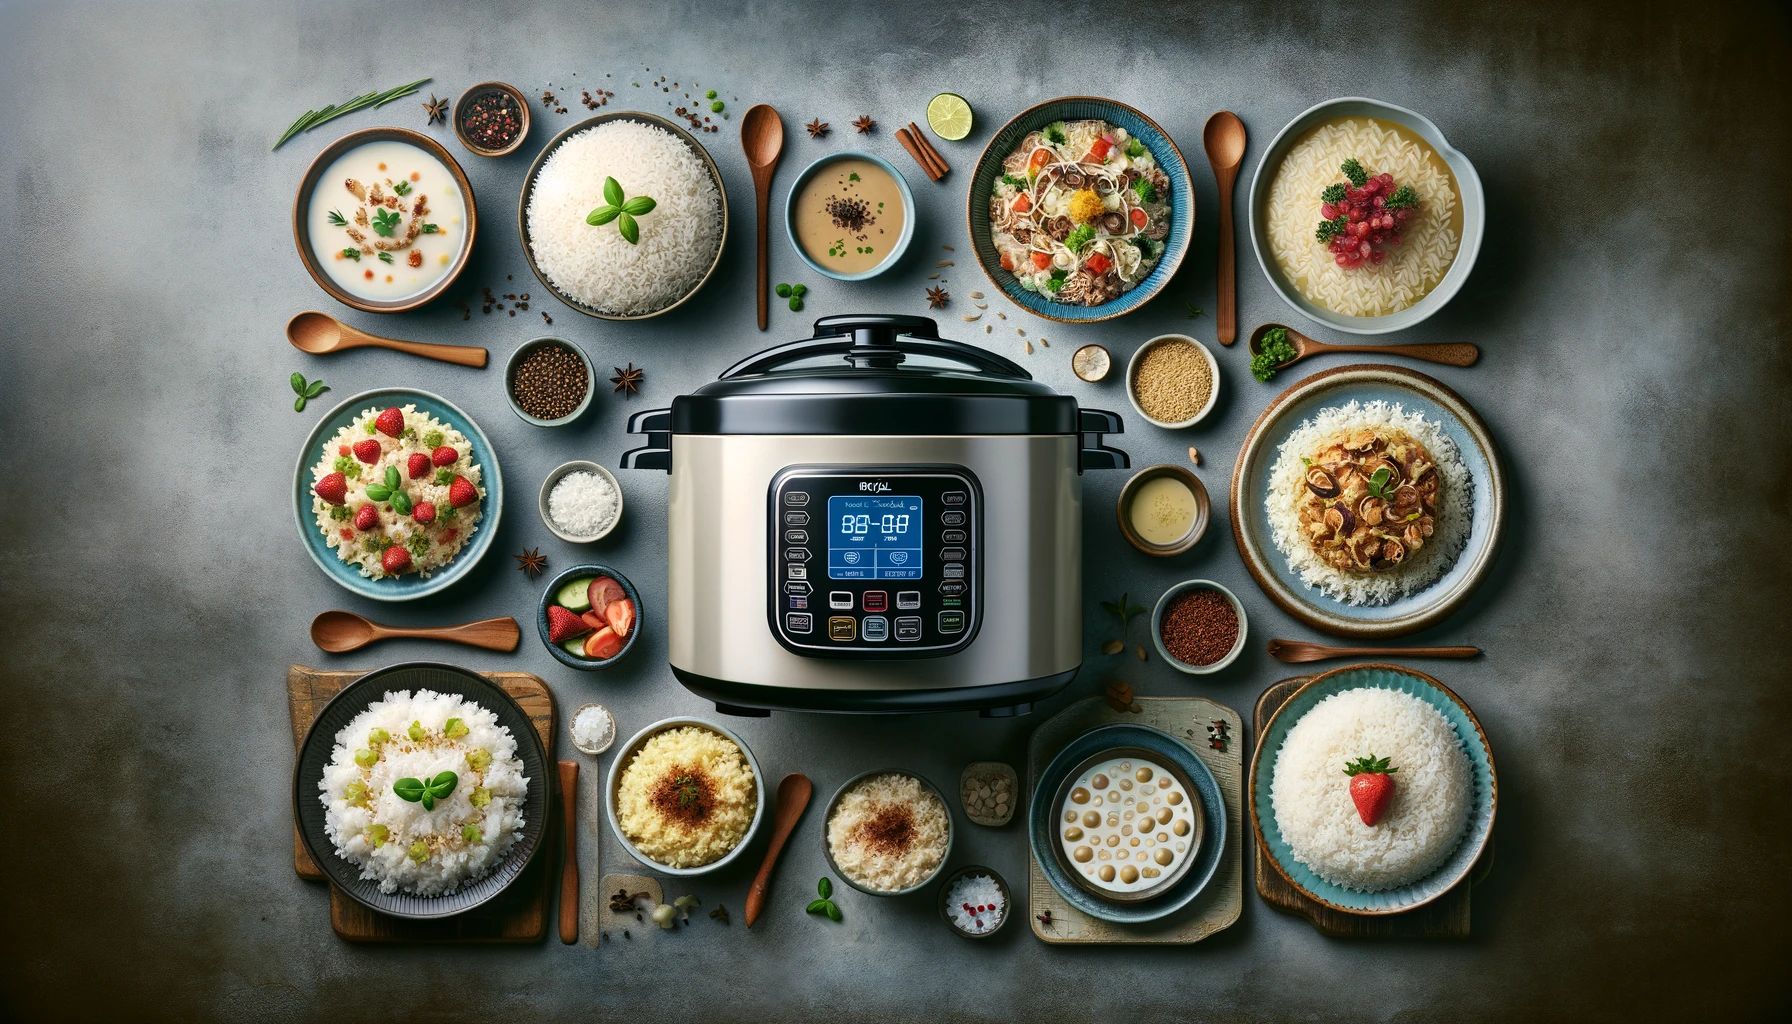 rival rice cooker recipes